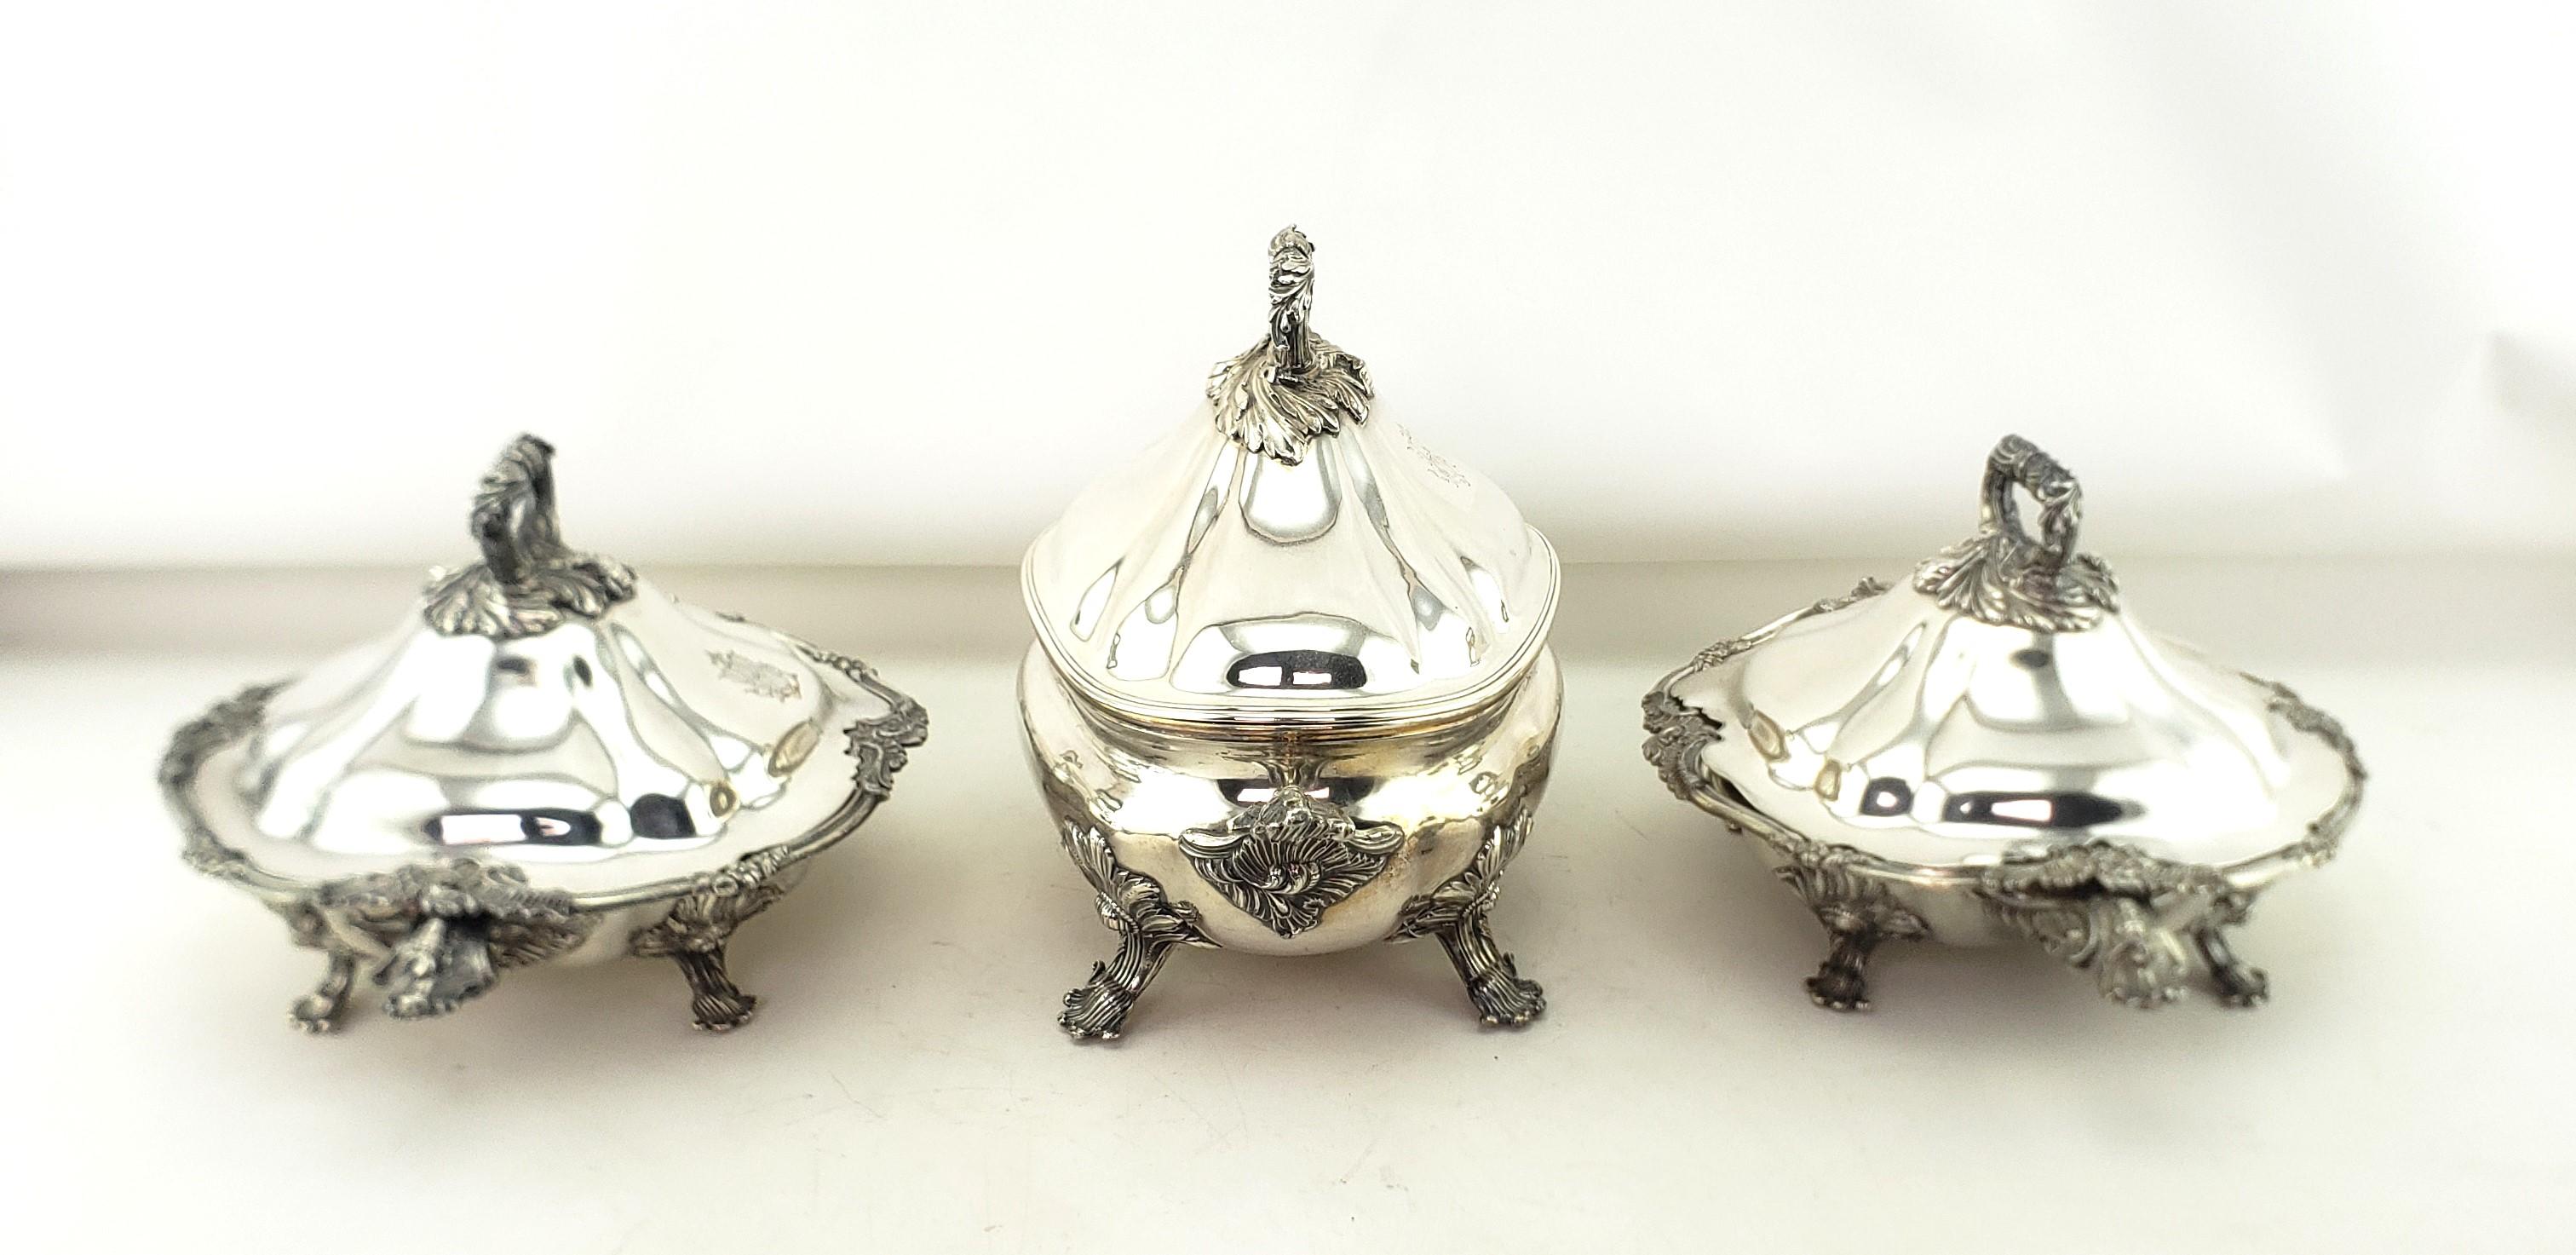 Three Antique Georgian Sheffield Plated Covered Tureens with Floral Decoration In Good Condition For Sale In Hamilton, Ontario